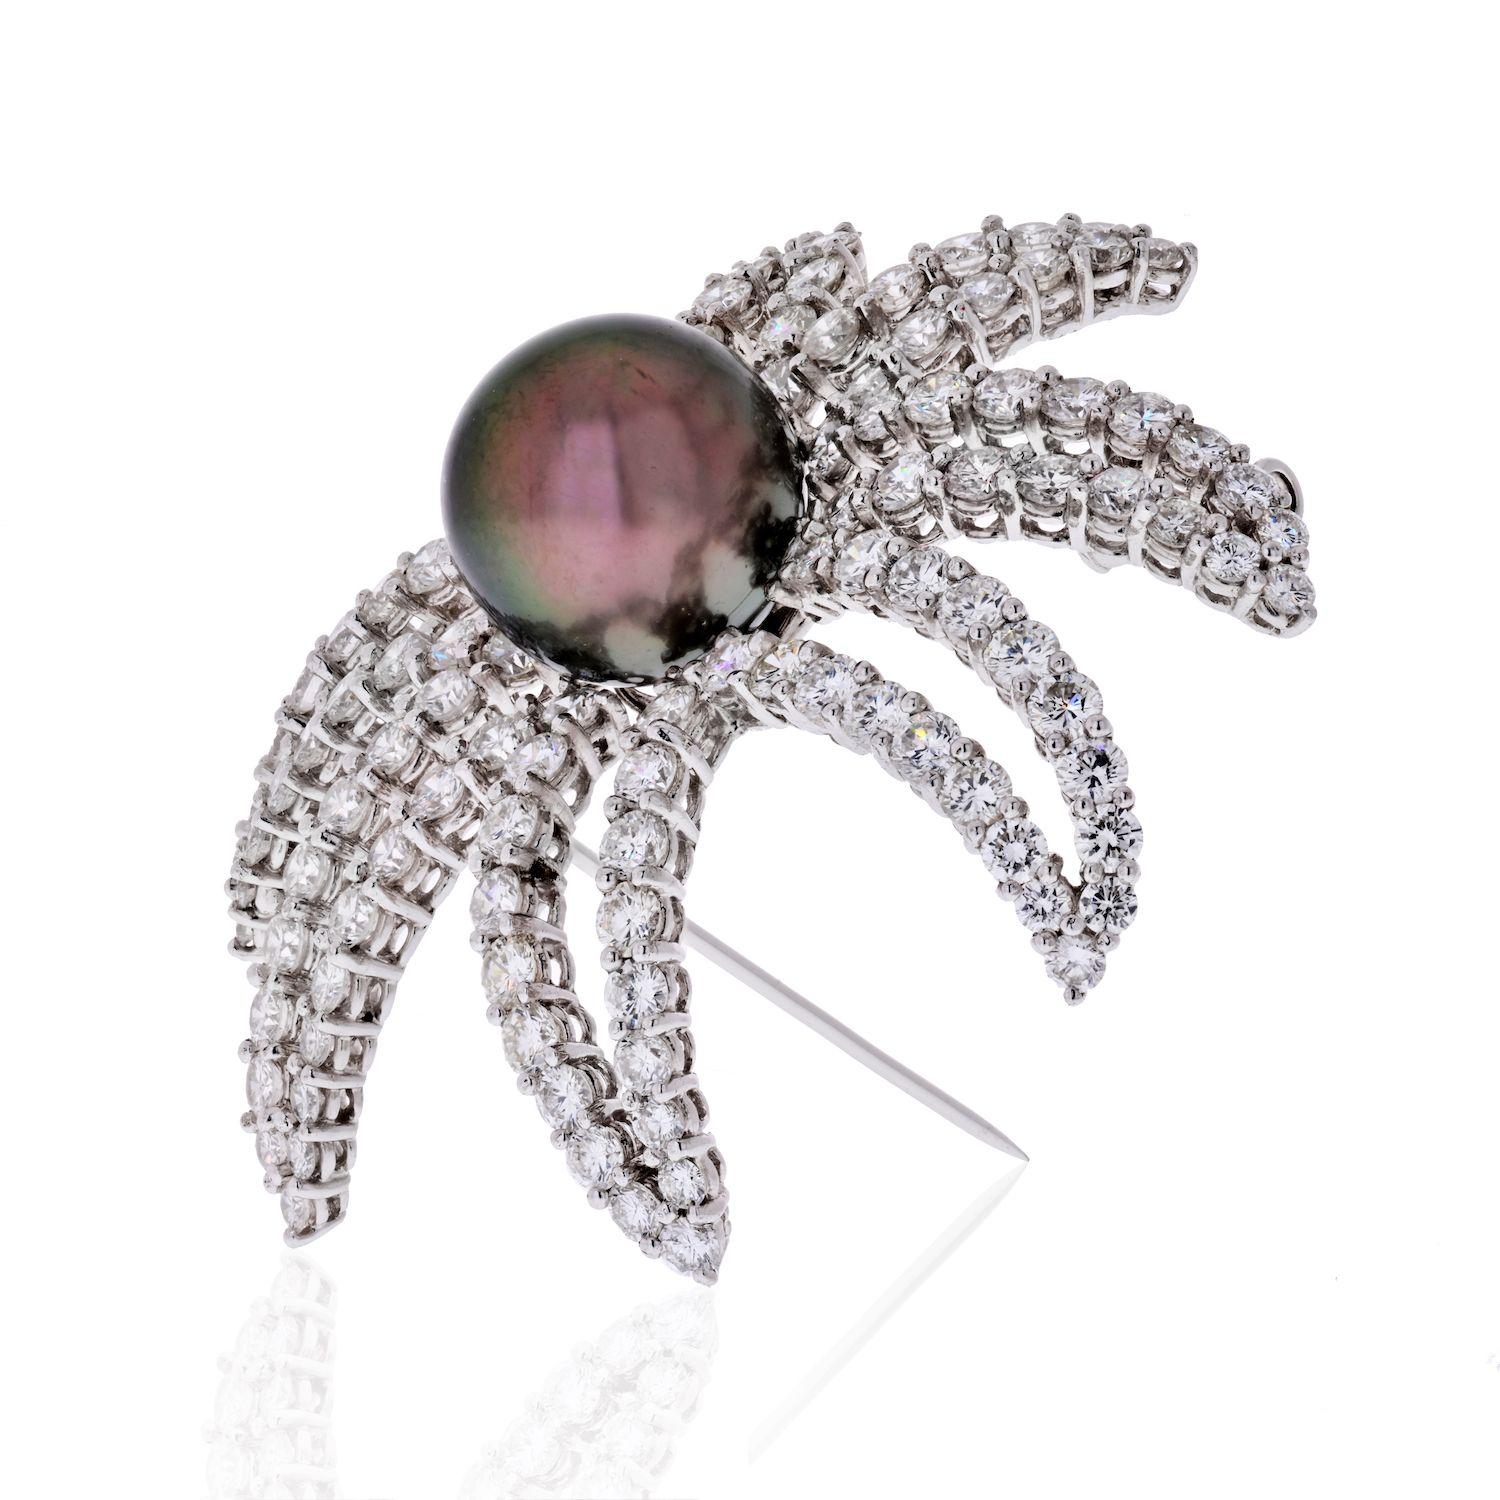 The Firework platinum brooch featuring a cultured pearl measuring 10 mm, enhanced by full-cut diamonds weighing a total of 5.50 carats. Brooch completed by a pin stem and catch.
Diamond Average Color: G-H-I
Diamond Average Clarity: VS
Diamond